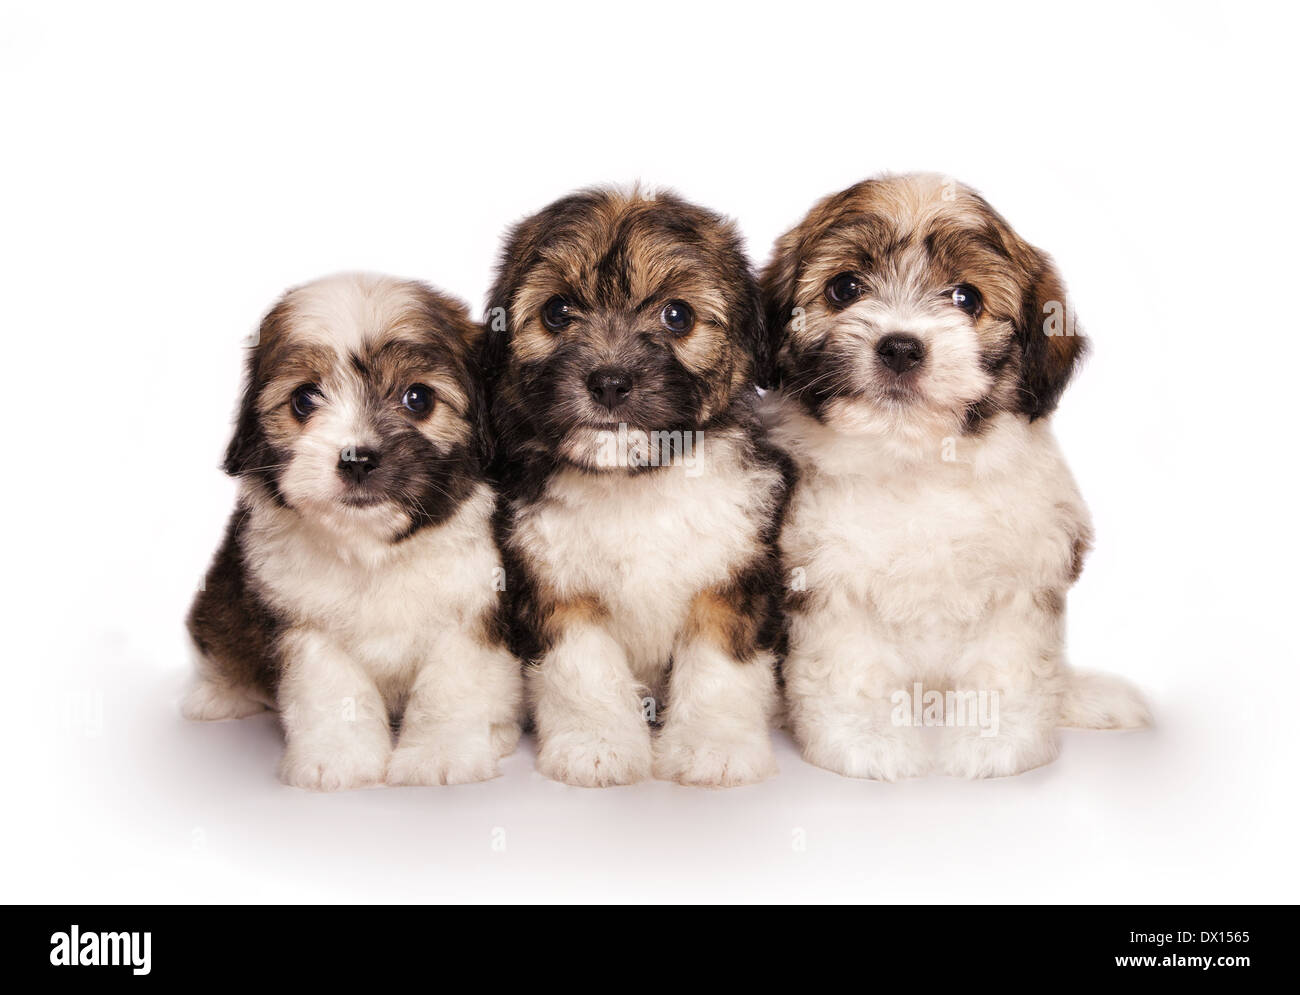 Trois adorables chiots jouet moelleux assis isolated on white Banque D'Images